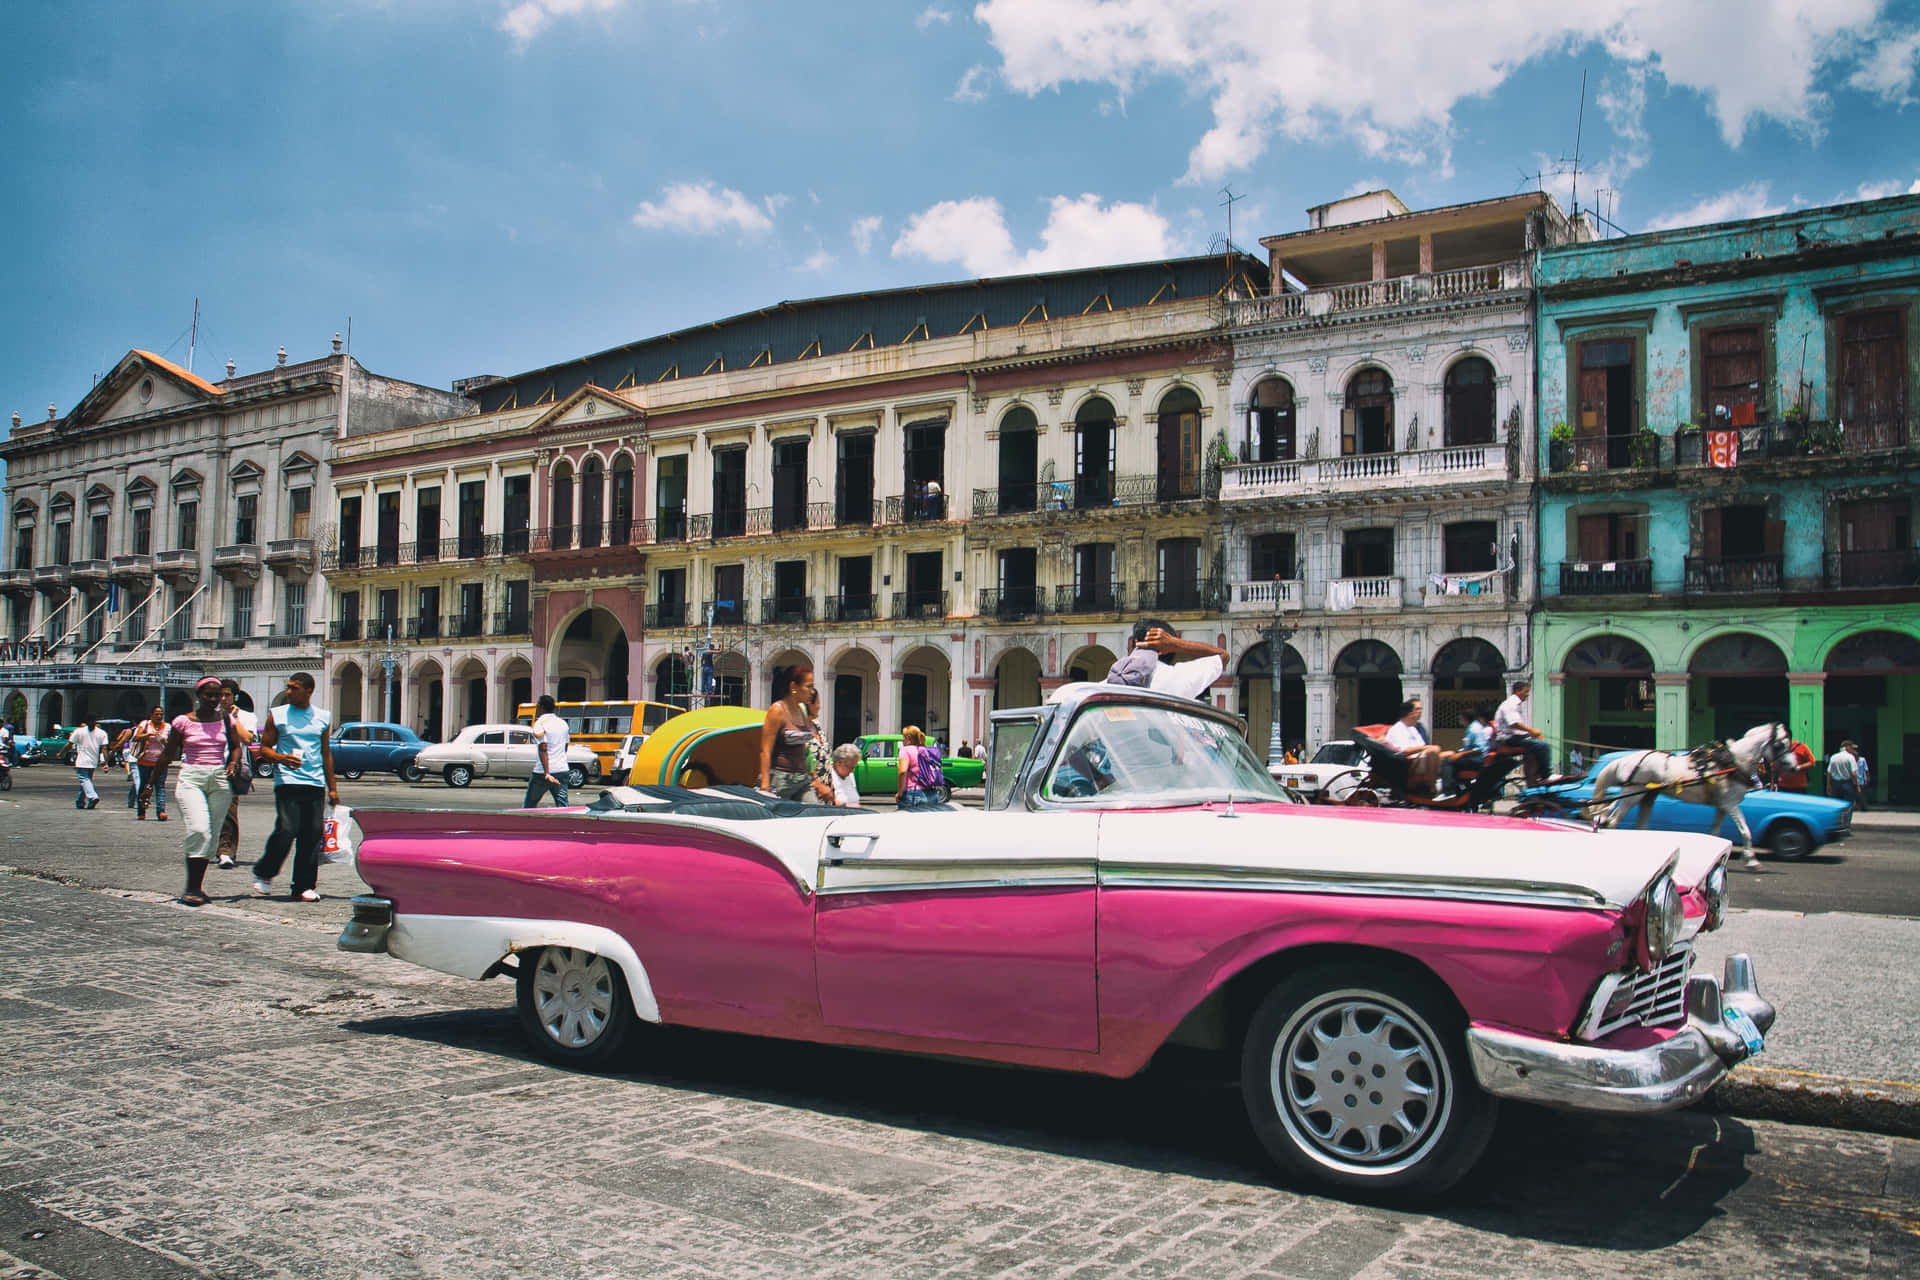 A Pink Vintage Car, classic and full of life. Wallpaper